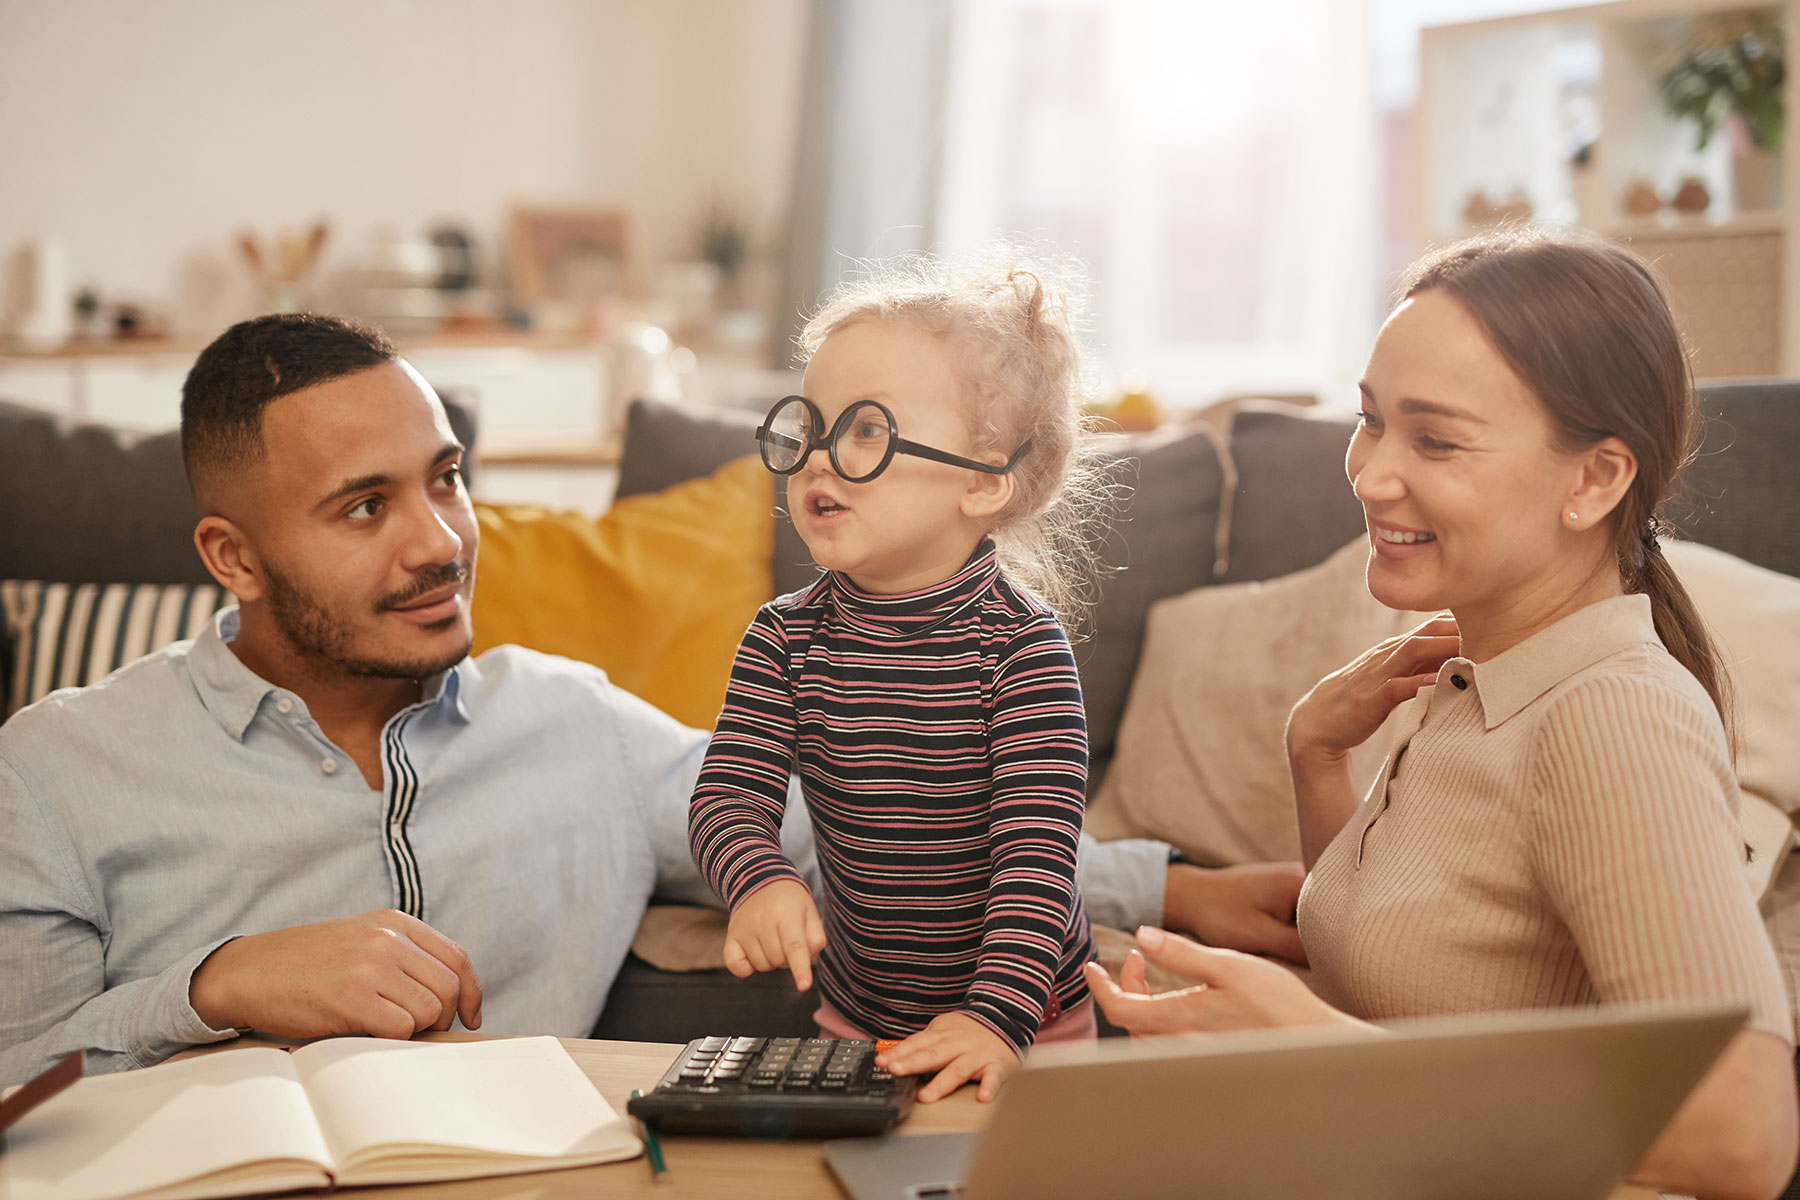 Young family with a child using a calculator wearing glasses